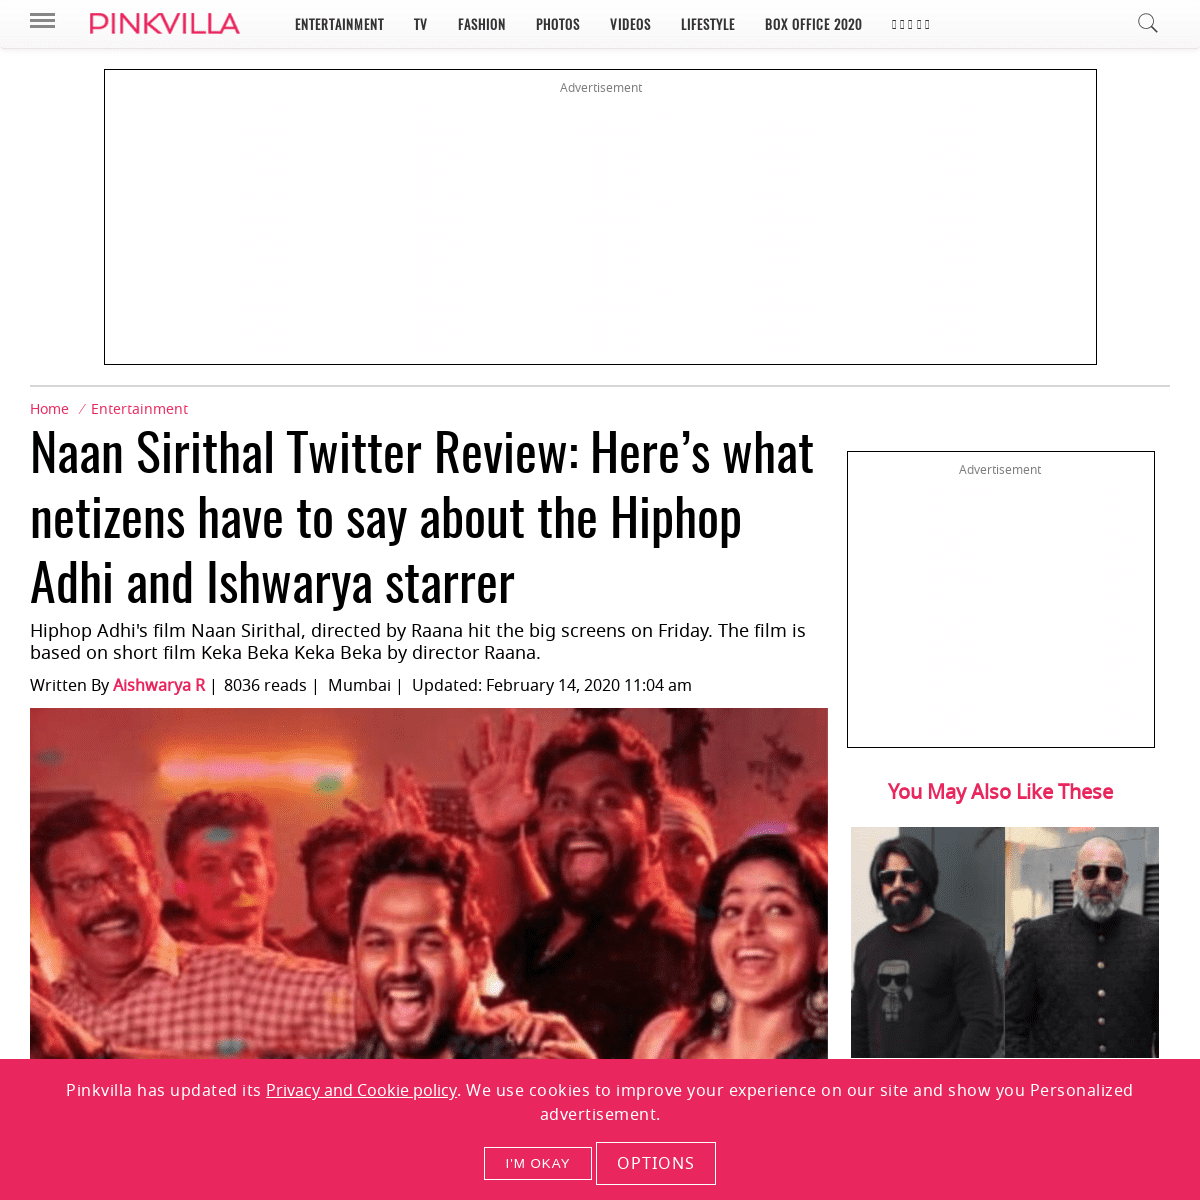 A complete backup of www.pinkvilla.com/entertainment/south/naan-sirithal-twitter-review-here-s-what-netizens-have-say-about-hiph